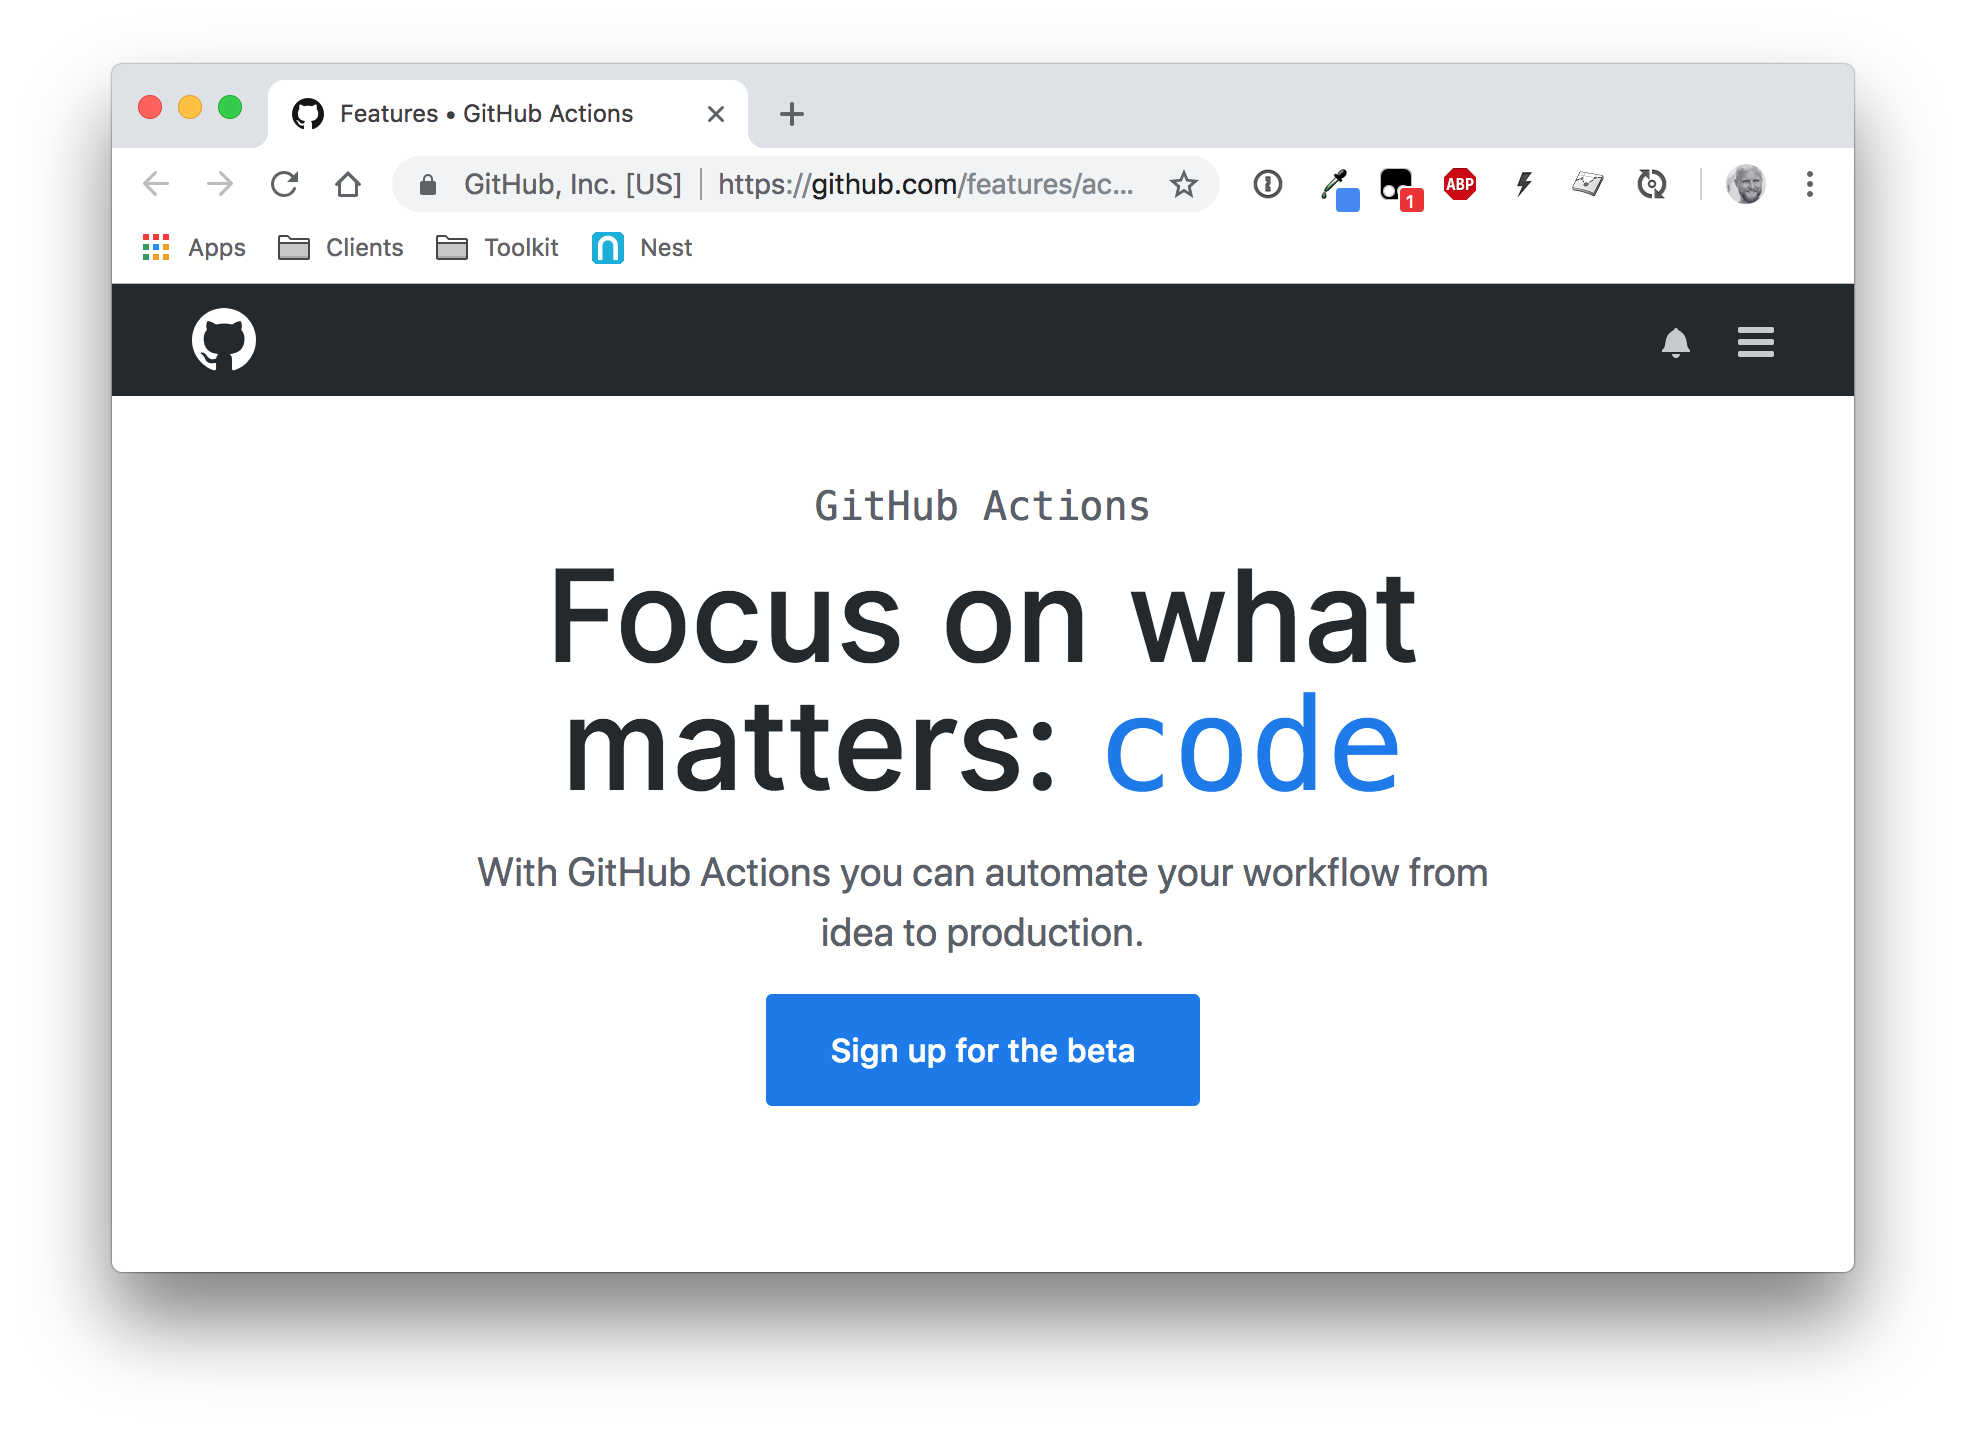 A screenshot of the GitHub Actions beta site showing a large blue button to click to join the beta.